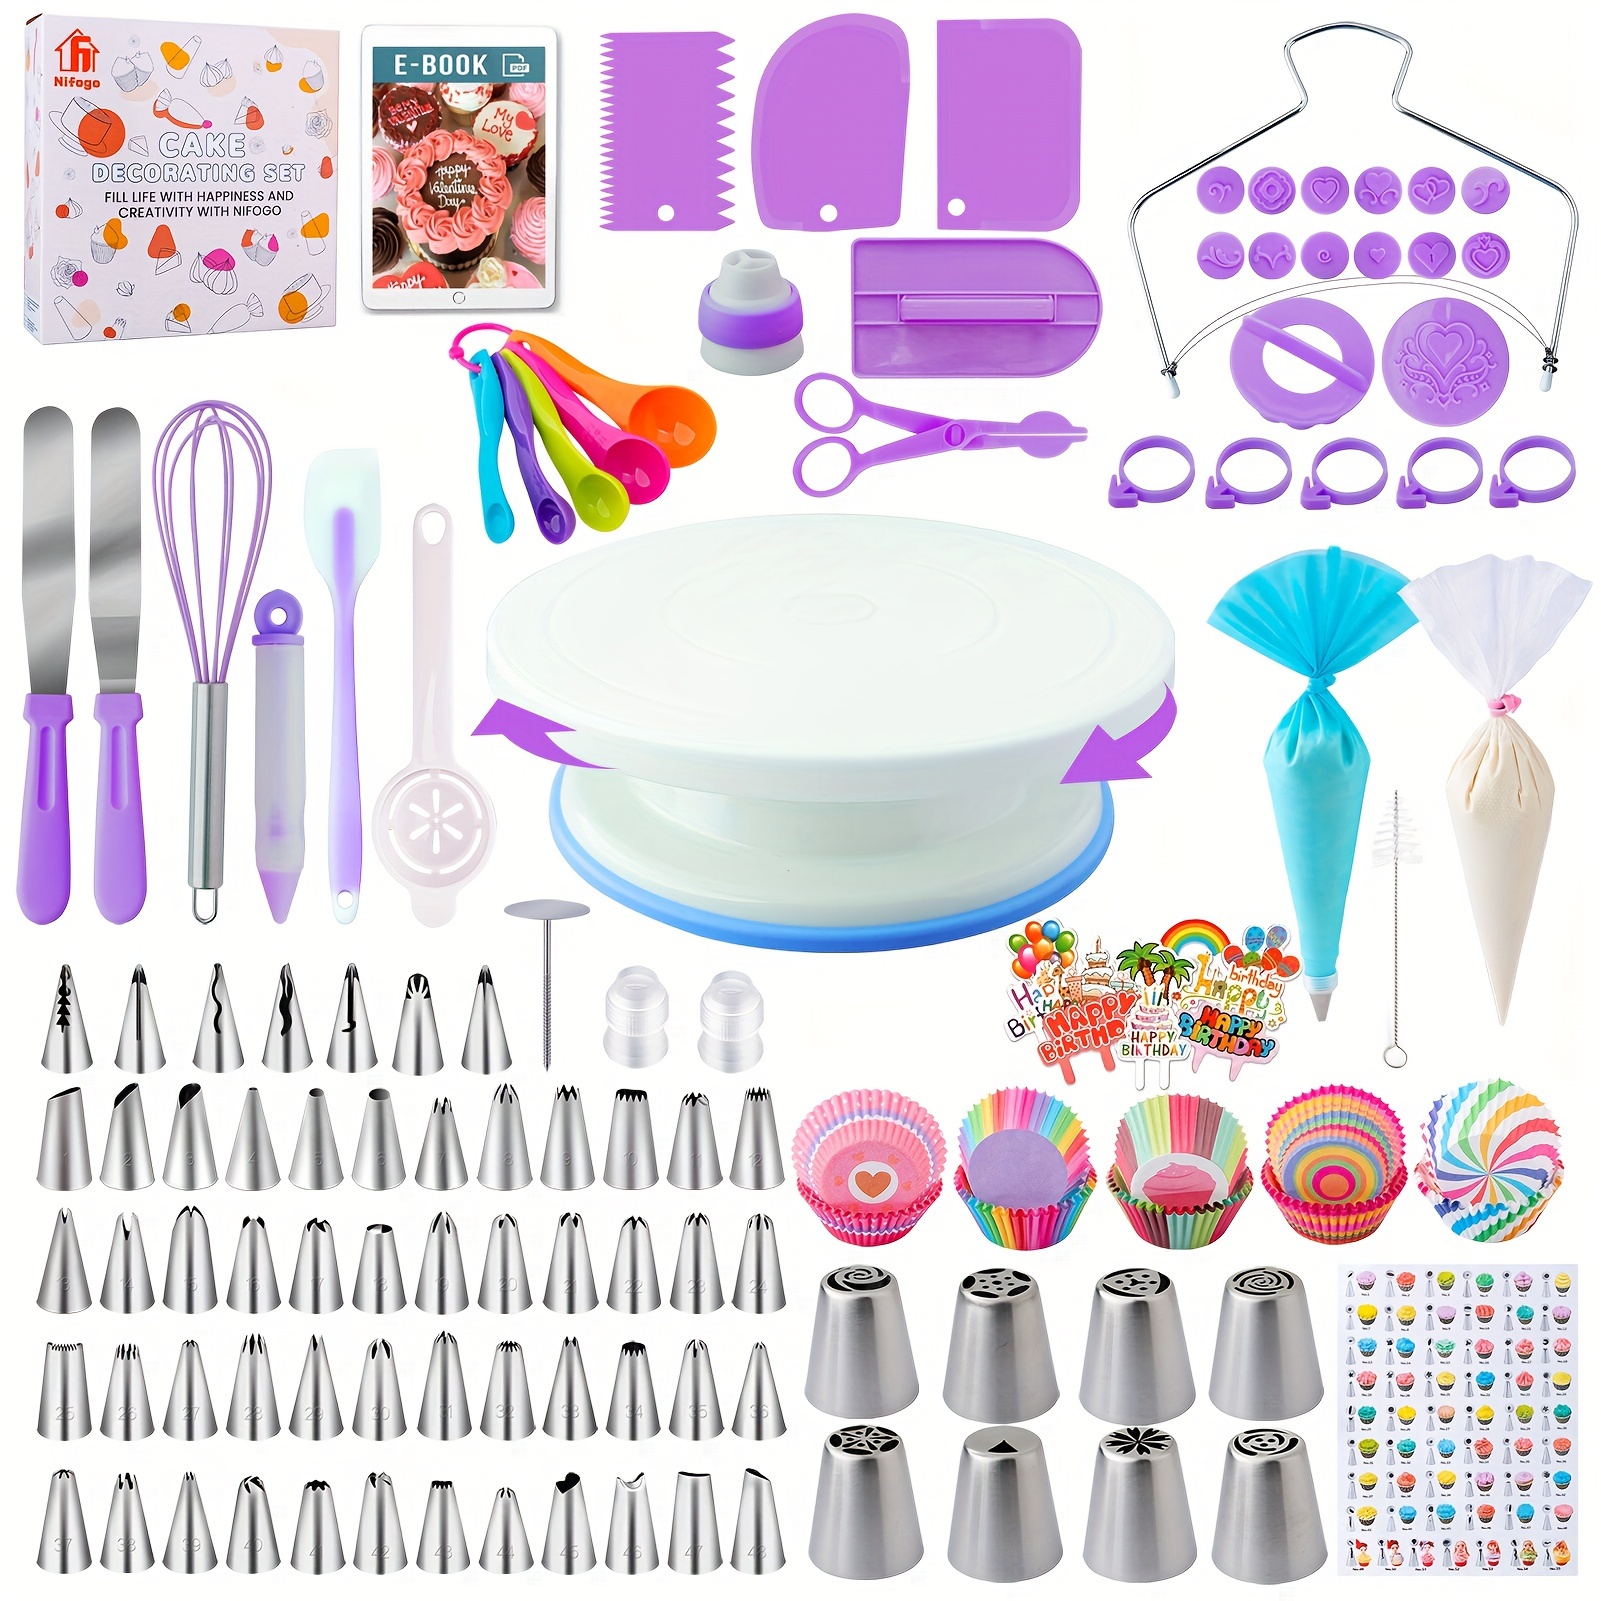 

Cake Decorating Supplies Kit Tools 356pcs, Baking Accessories With Cake Turntable, Pastry Piping Bag, Piping Icing Tips For Beginners